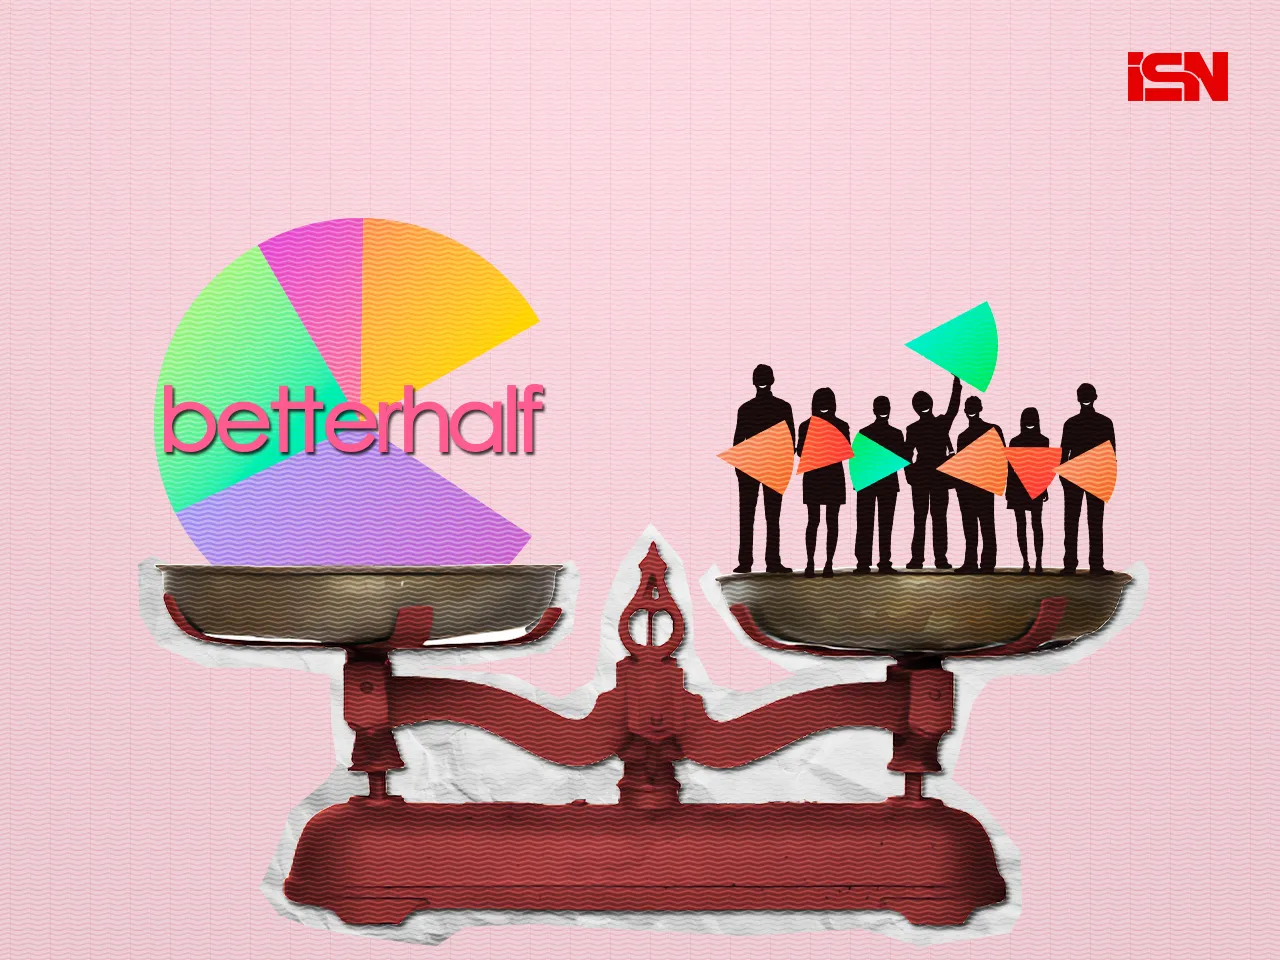 Matrimony startup Betterhalf has announced second ESOP buyback program for its employees